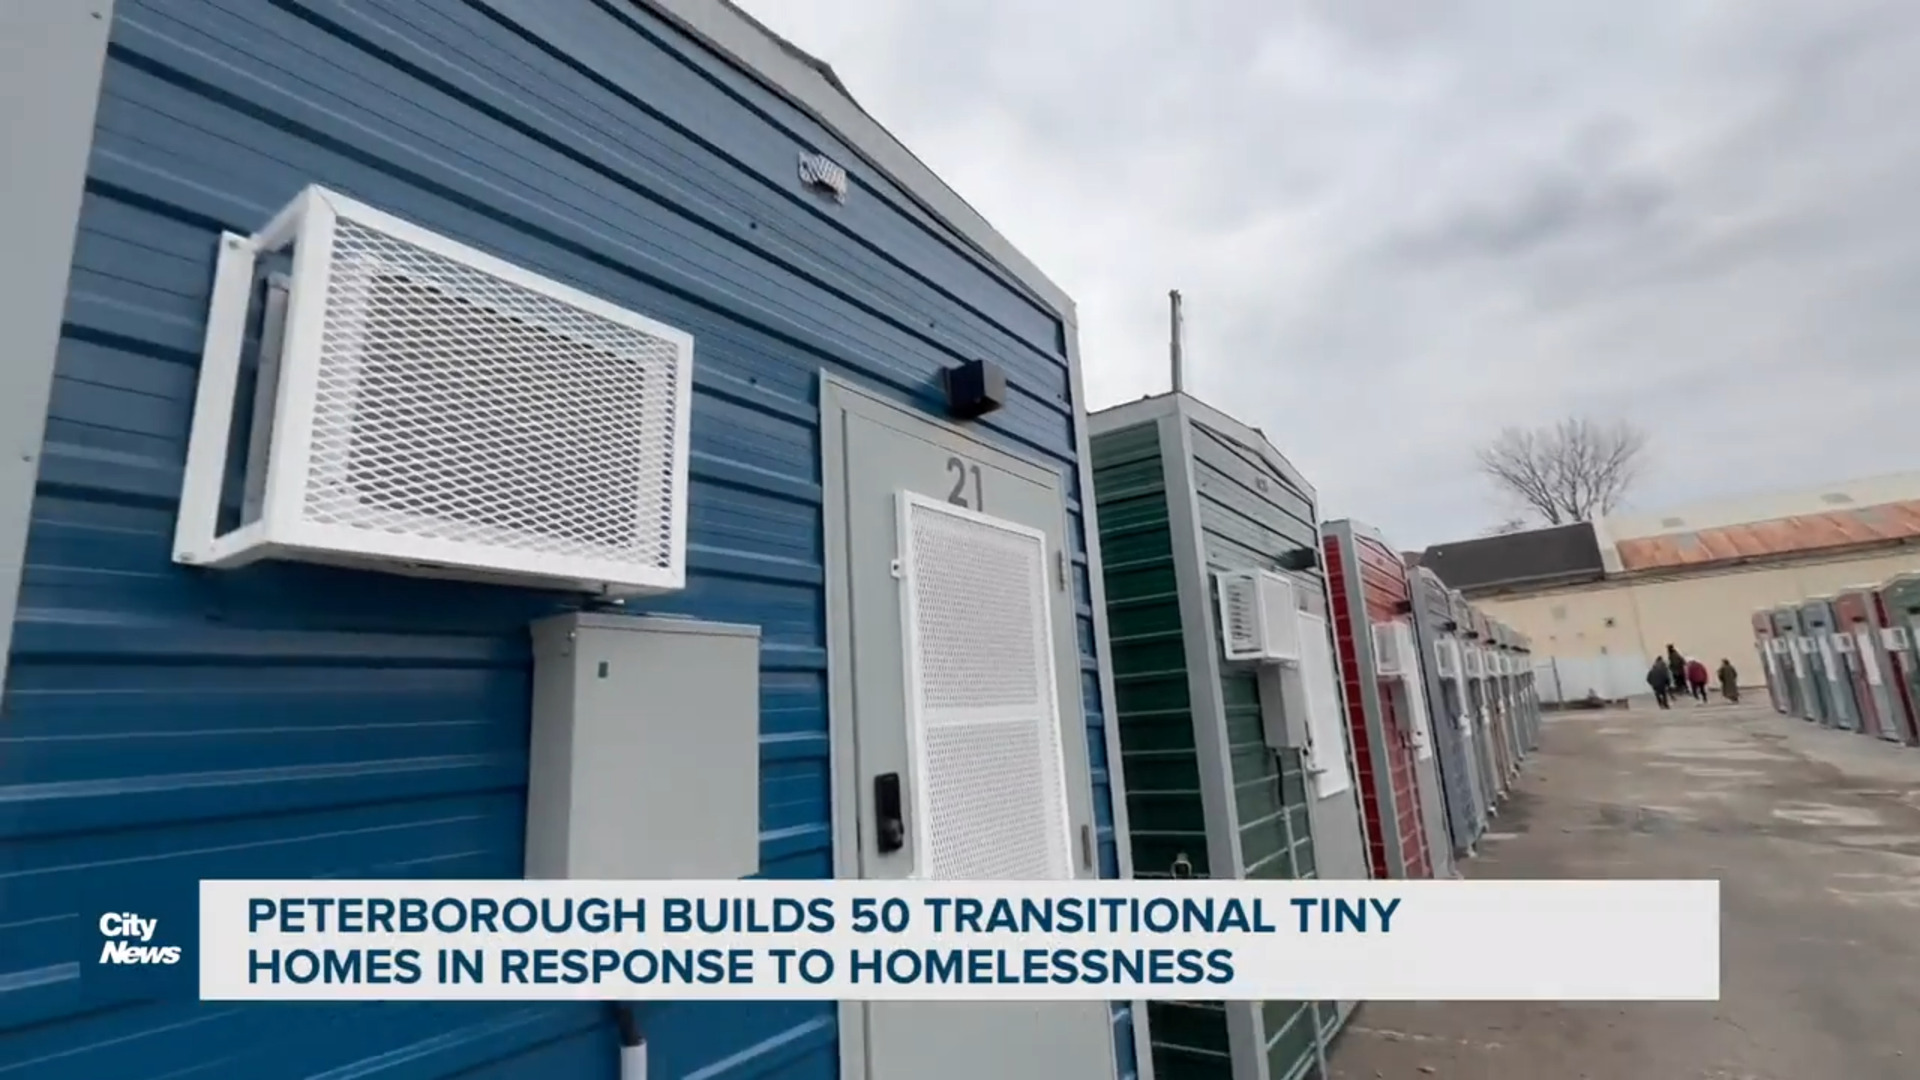 Peterborough builds 50 transitional tiny homes in response to homelessness